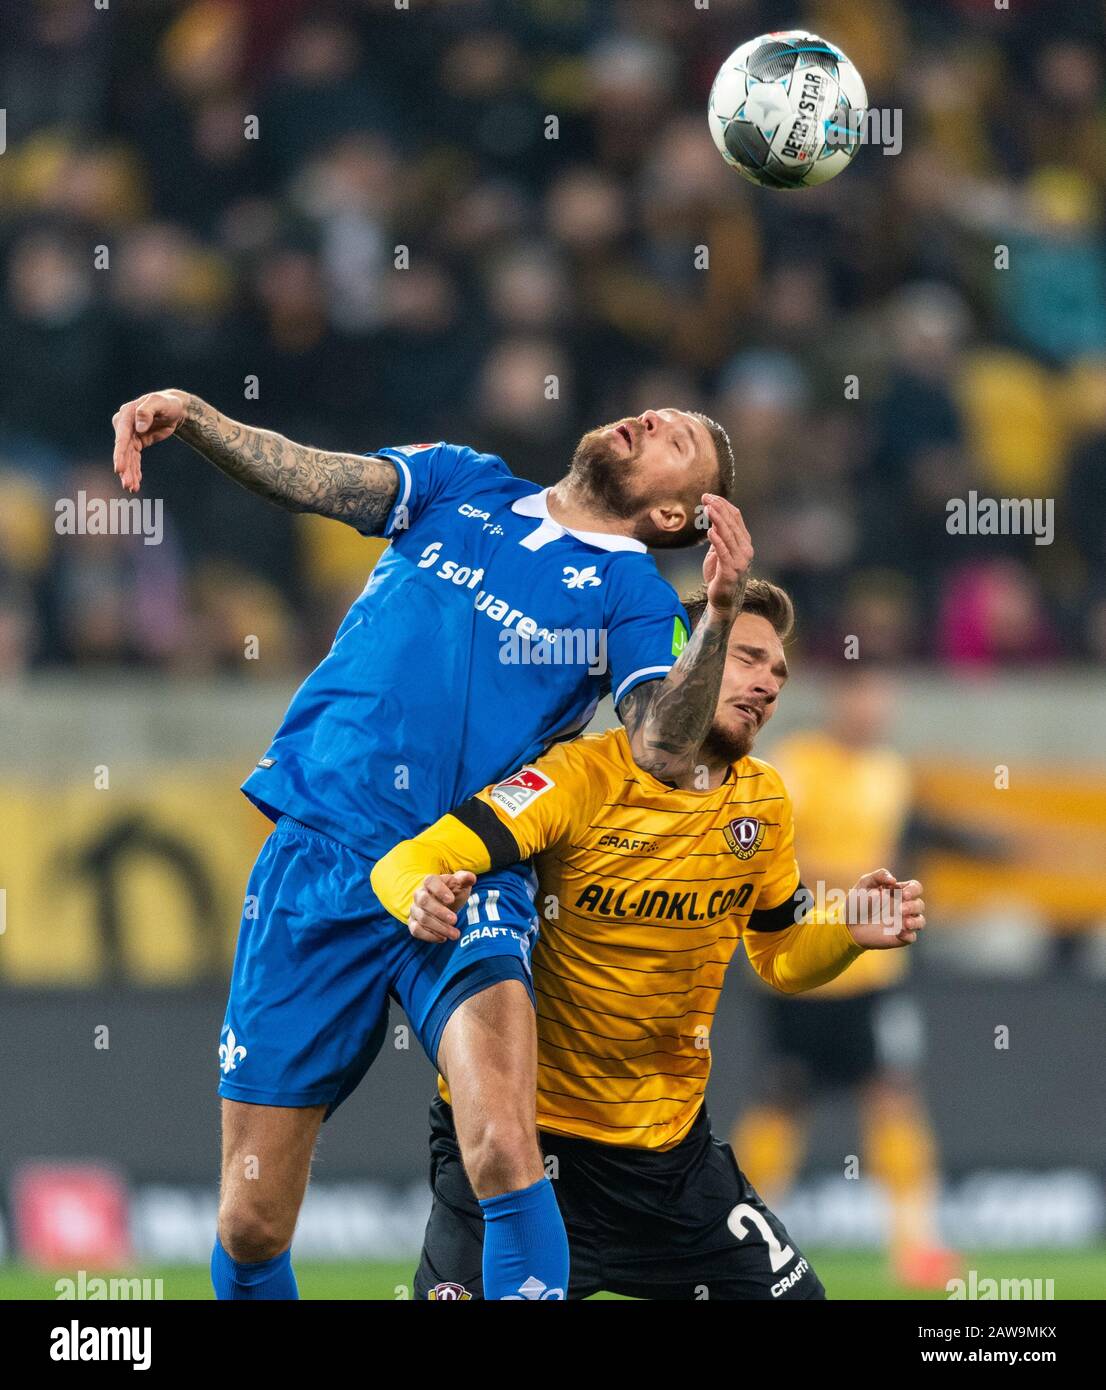 Dresden, Germany. 07th Feb, 2020. Football: 2nd Bundesliga, SG Dynamo Dresden - SV Darmstadt 98, 21st matchday, at the Rudolf Harbig Stadium. Darmstadt's Tobias Kempe (l) against Dynamos Linus Wahlqvist. Credit: Robert Michael/dpa-Zentralbild/dpa - IMPORTANT NOTE: In accordance with the regulations of the DFL Deutsche Fußball Liga and the DFB Deutscher Fußball-Bund, it is prohibited to exploit or have exploited in the stadium and/or from the game taken photographs in the form of sequence images and/or video-like photo series./dpa/Alamy Live News Stock Photo